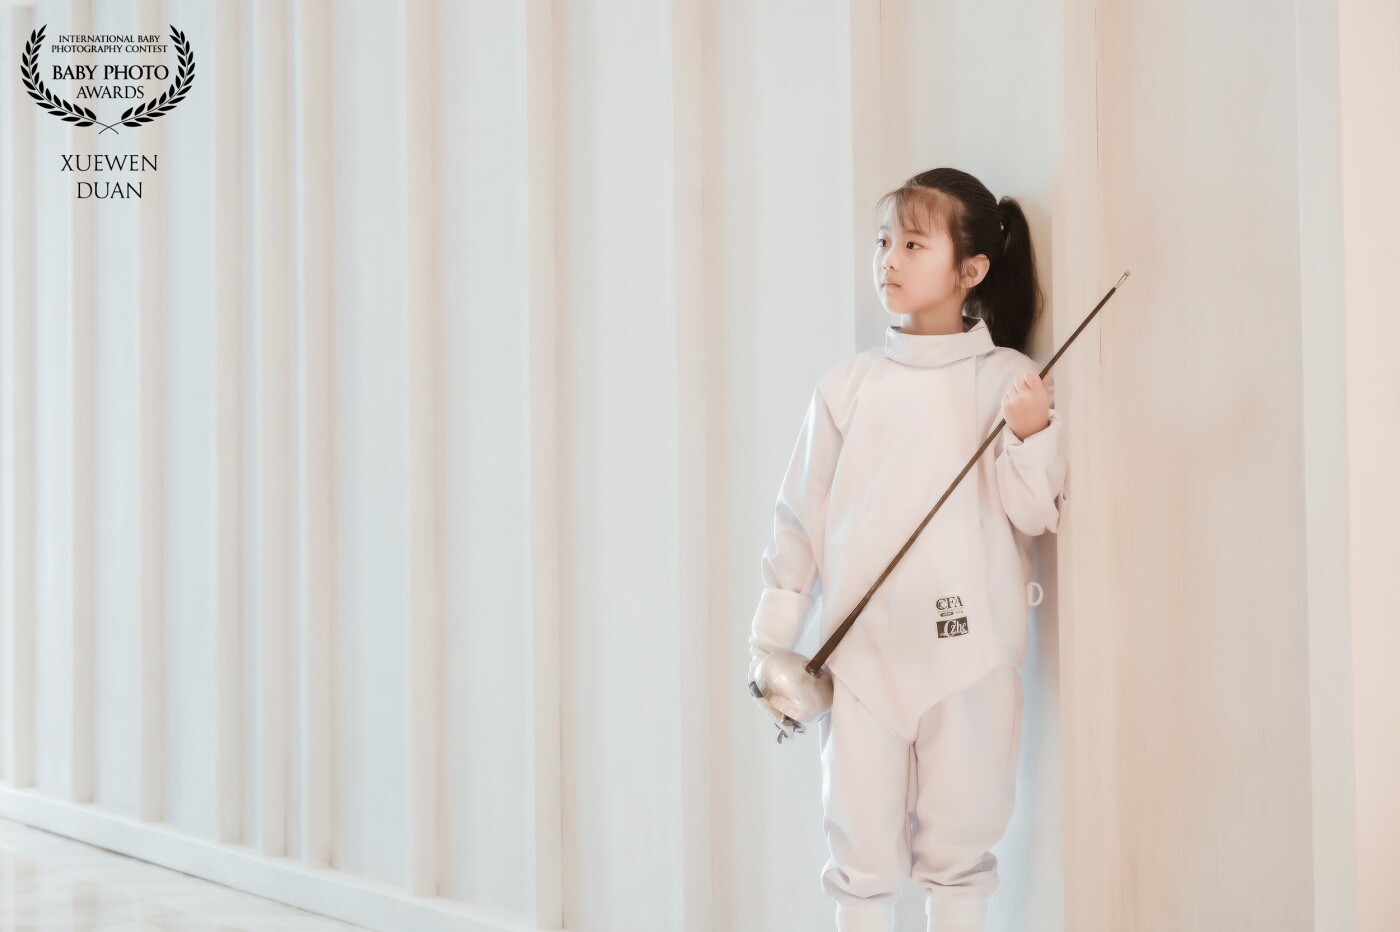 The fencing girl, Qiqi, 7, is a lively and lovely girl. She looks very beautiful after she wears fencing clothes. We took this picture in the corner of the hotel lobby.